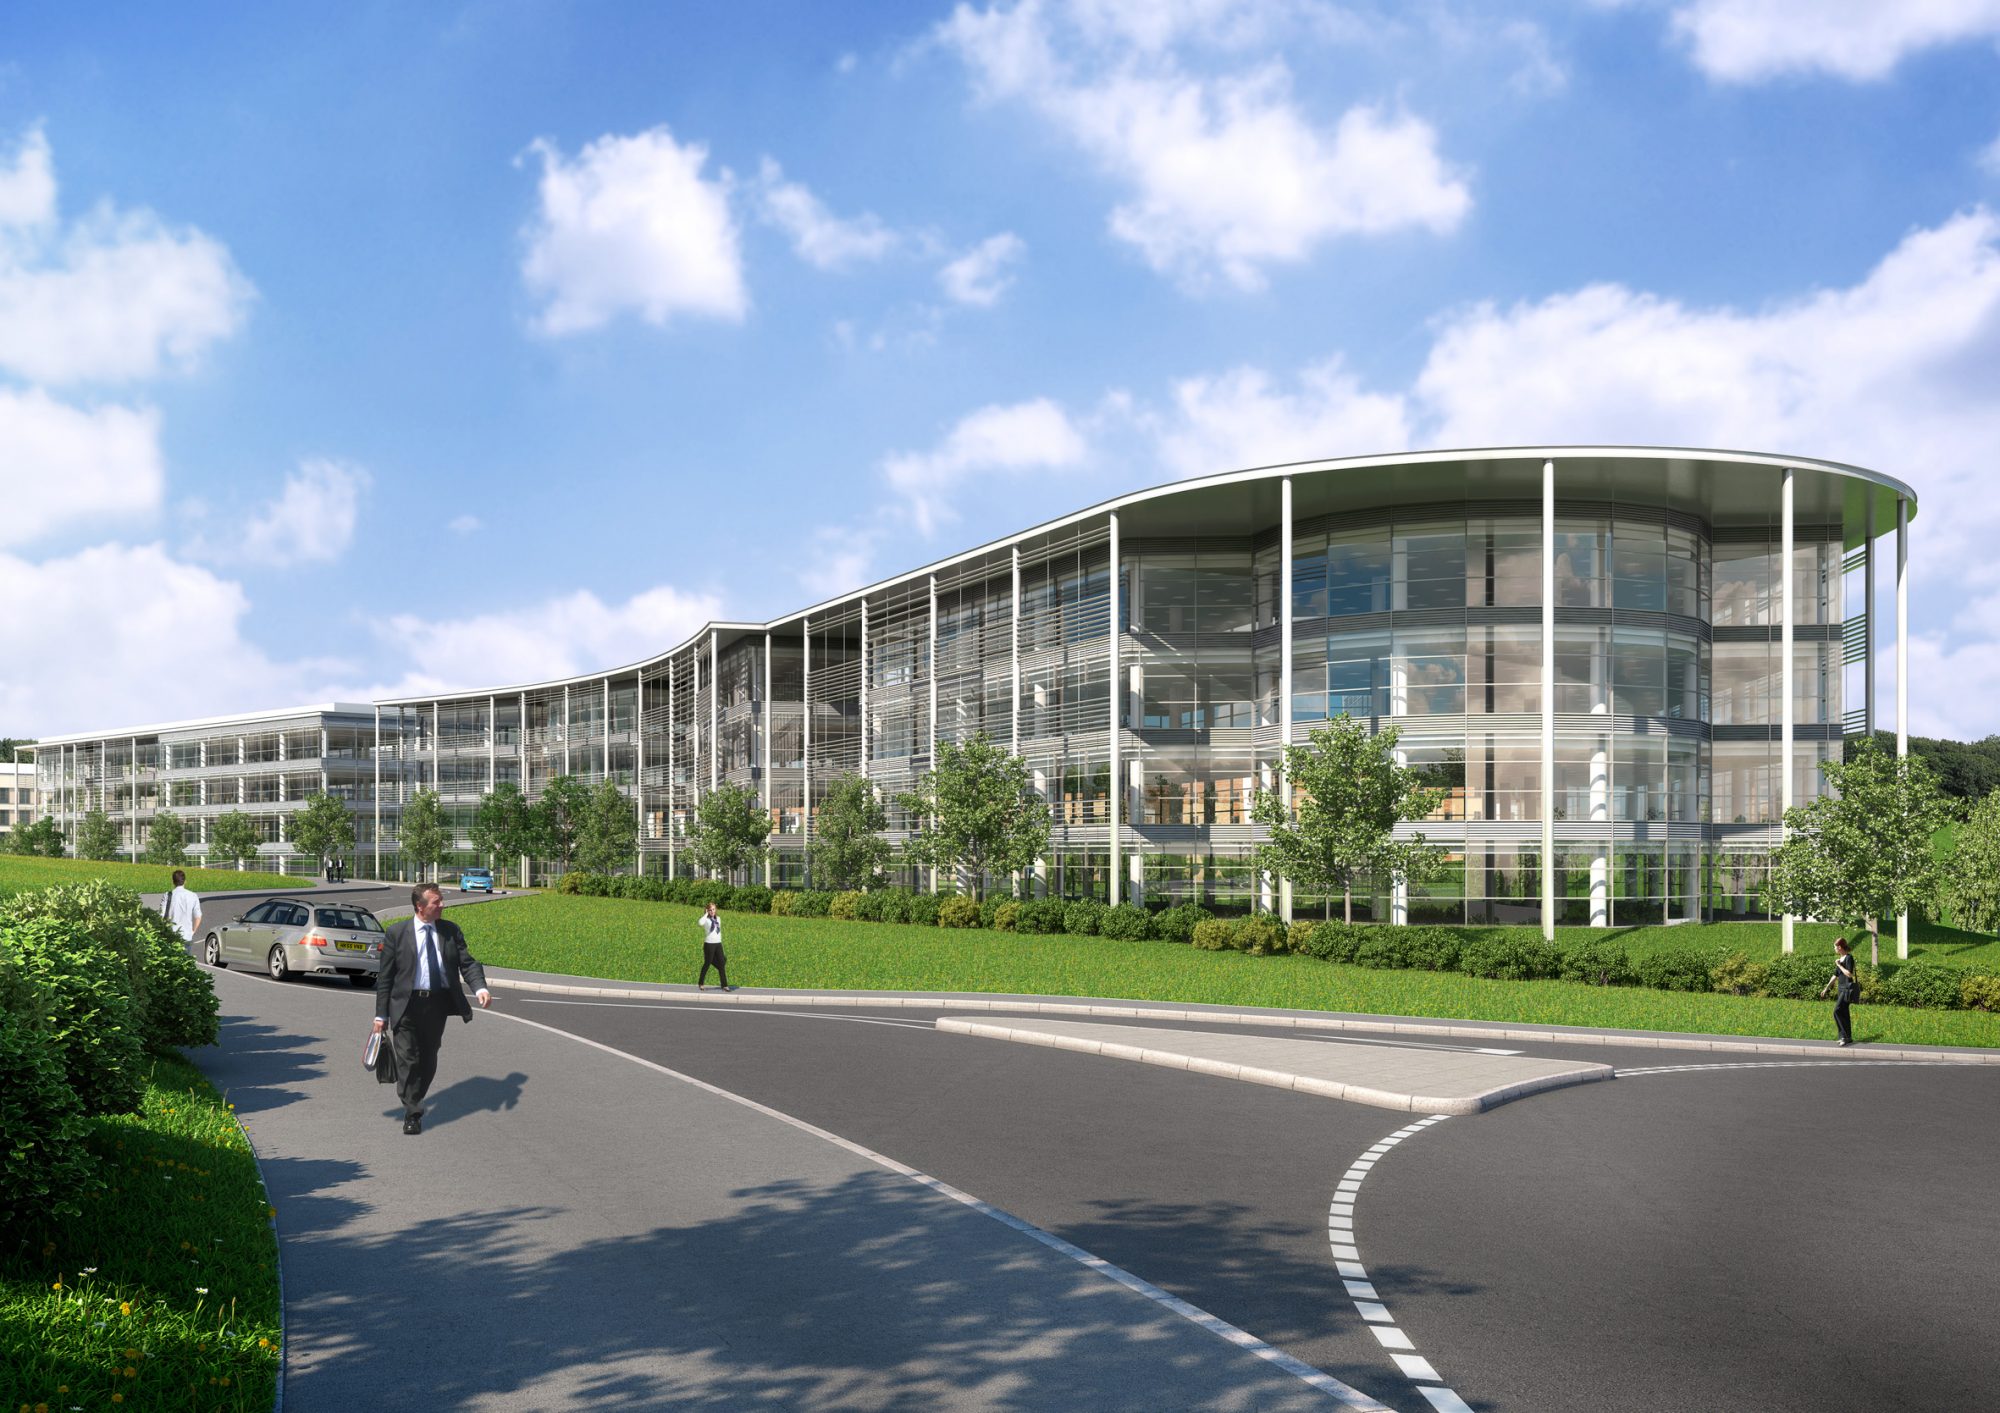 North Kent Enterprise Zone for new business